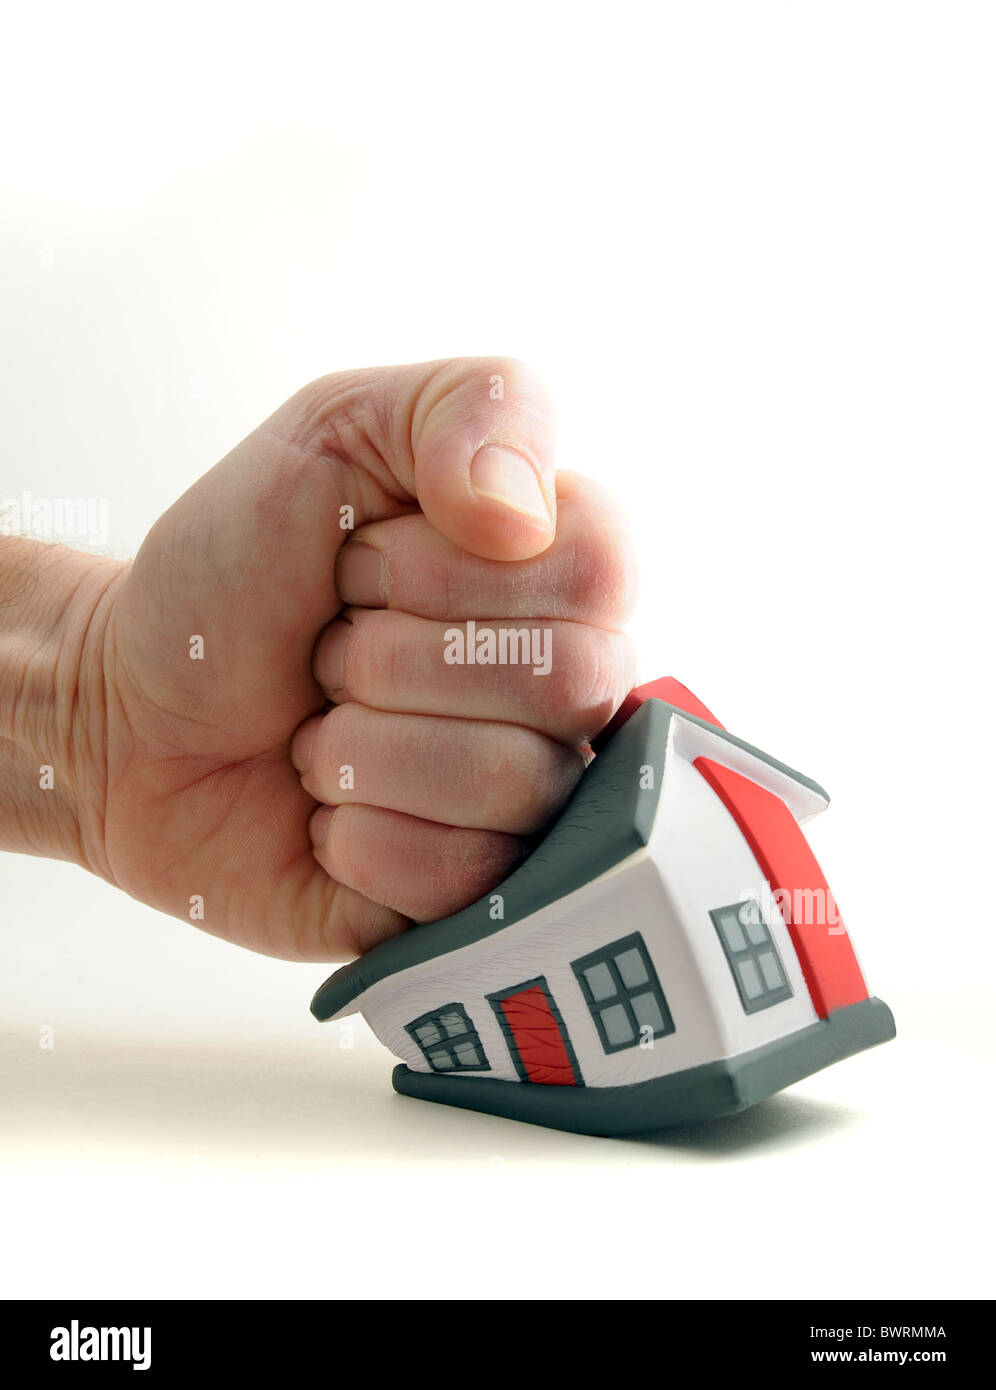 HOUSE BEING SQUASHED/HIT BY MANS FIST RE HOUSING MARKET,PRICES,HOUSEHOLD BUDGETS ETC. UK Stock Photo